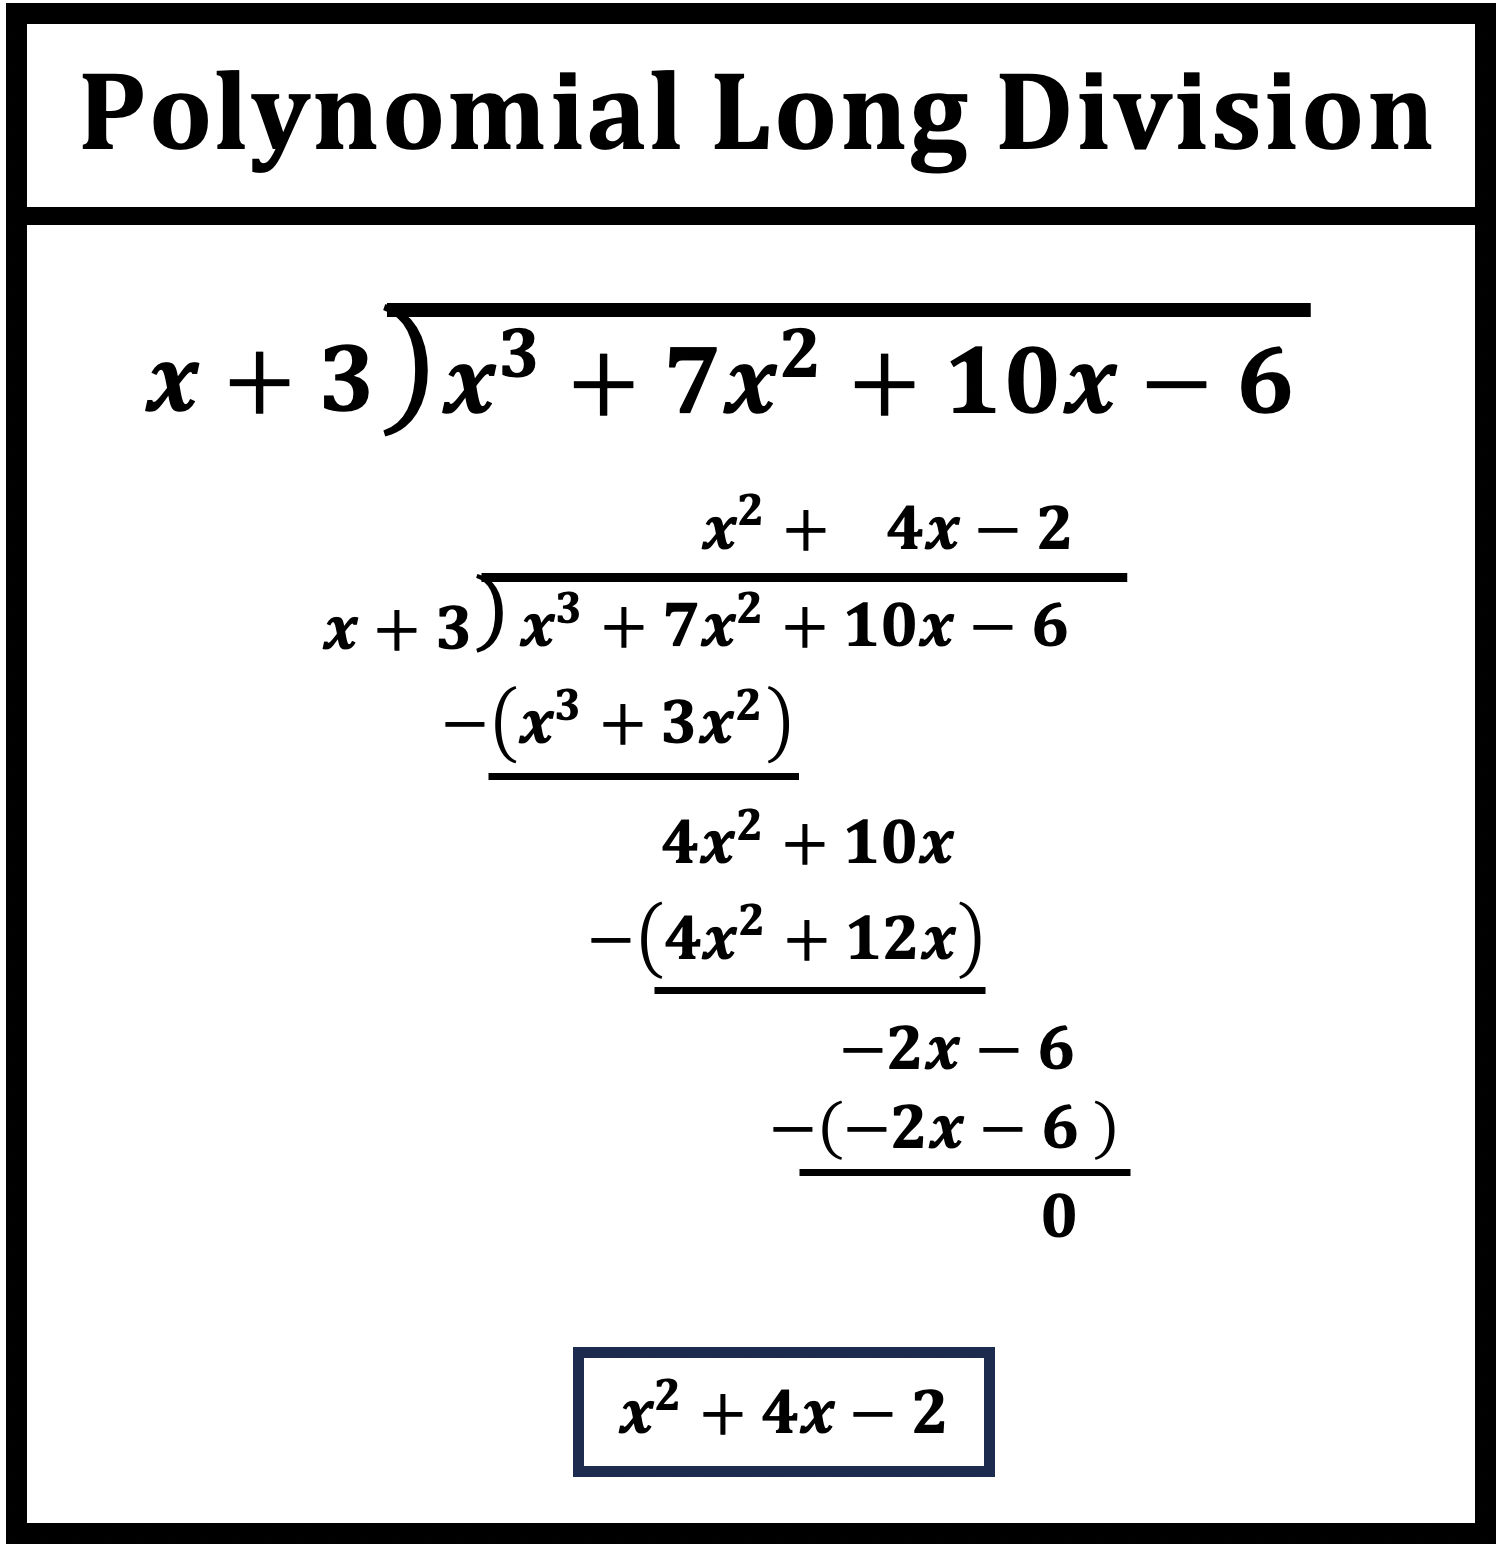 Polynomial Long Division Example Problem